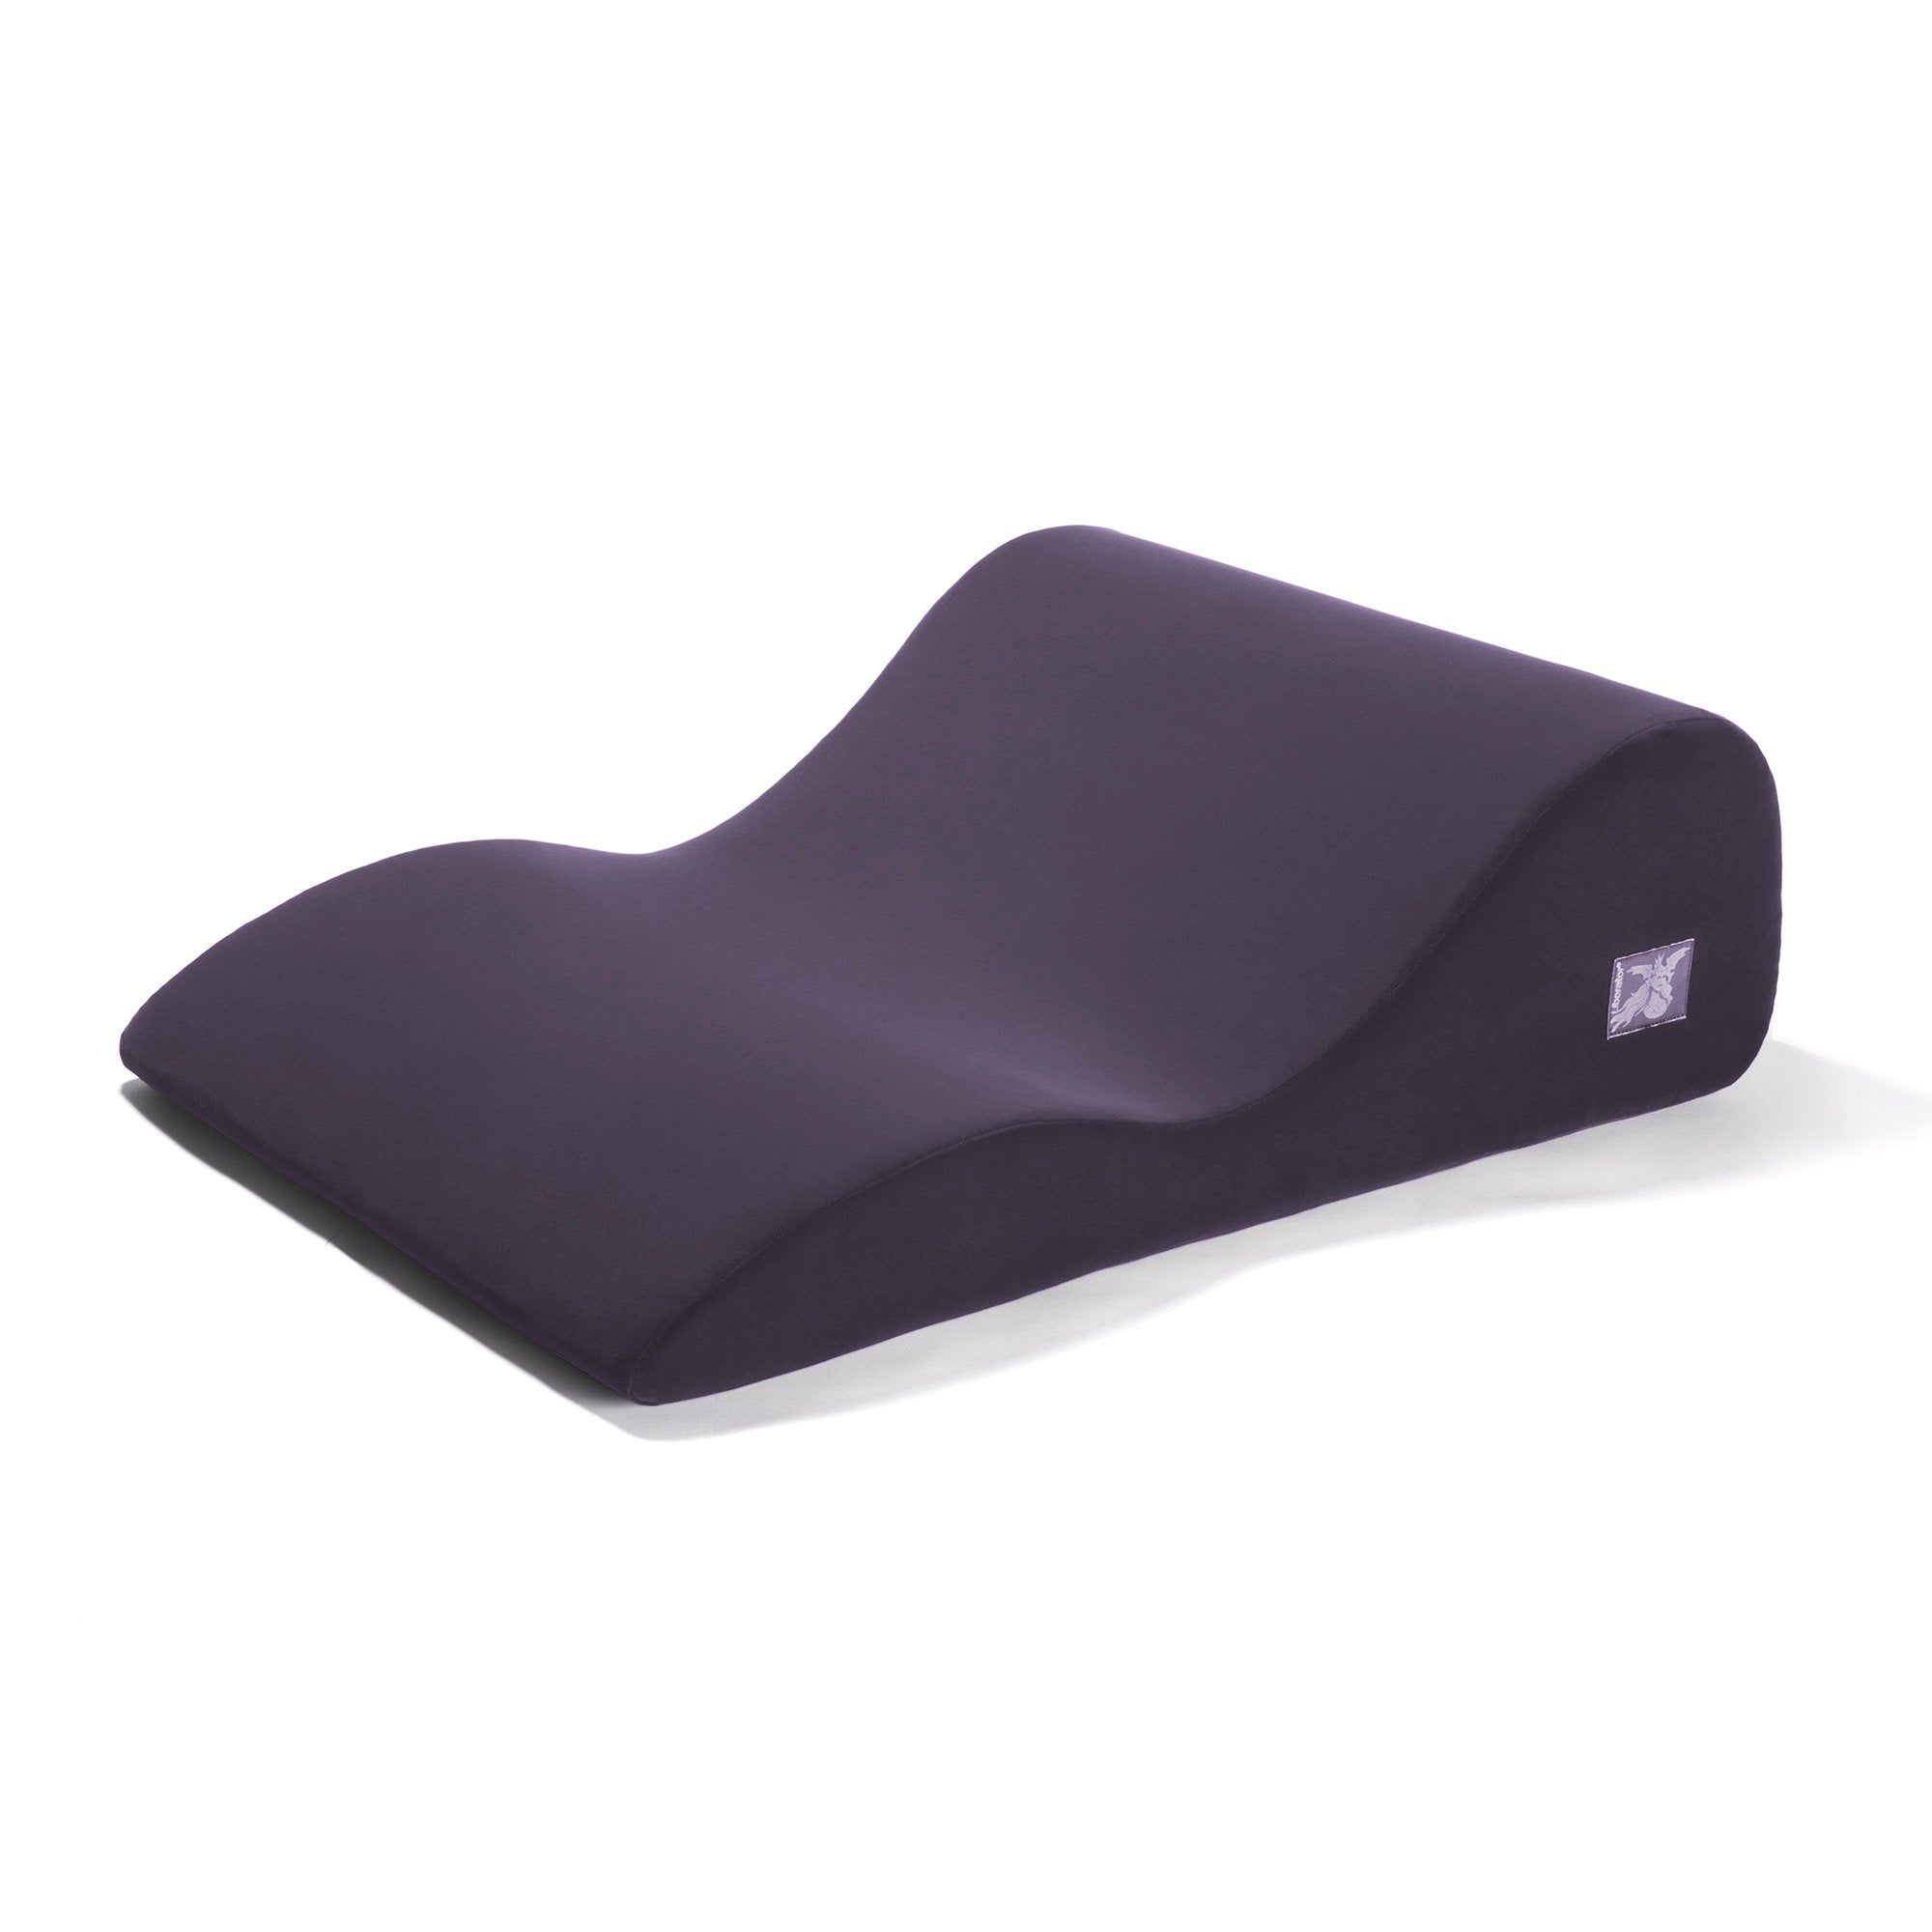 Liberator Hipster Sex Positioning Cushion - Assorted Colors